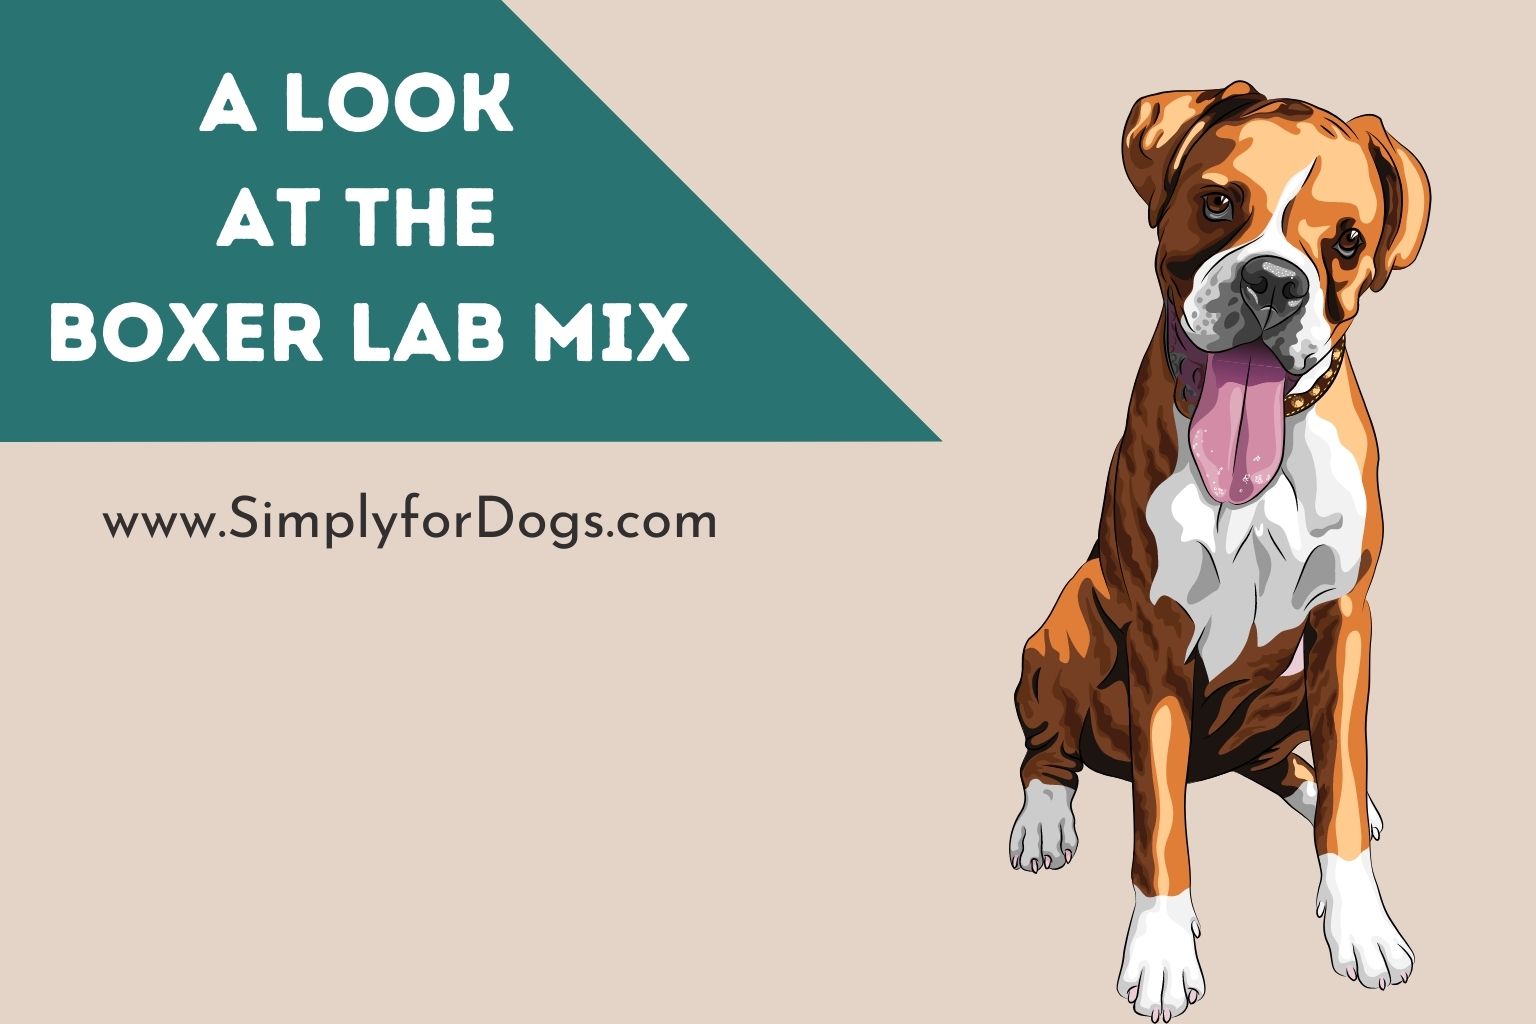 A Look at the Boxer Lab Mix